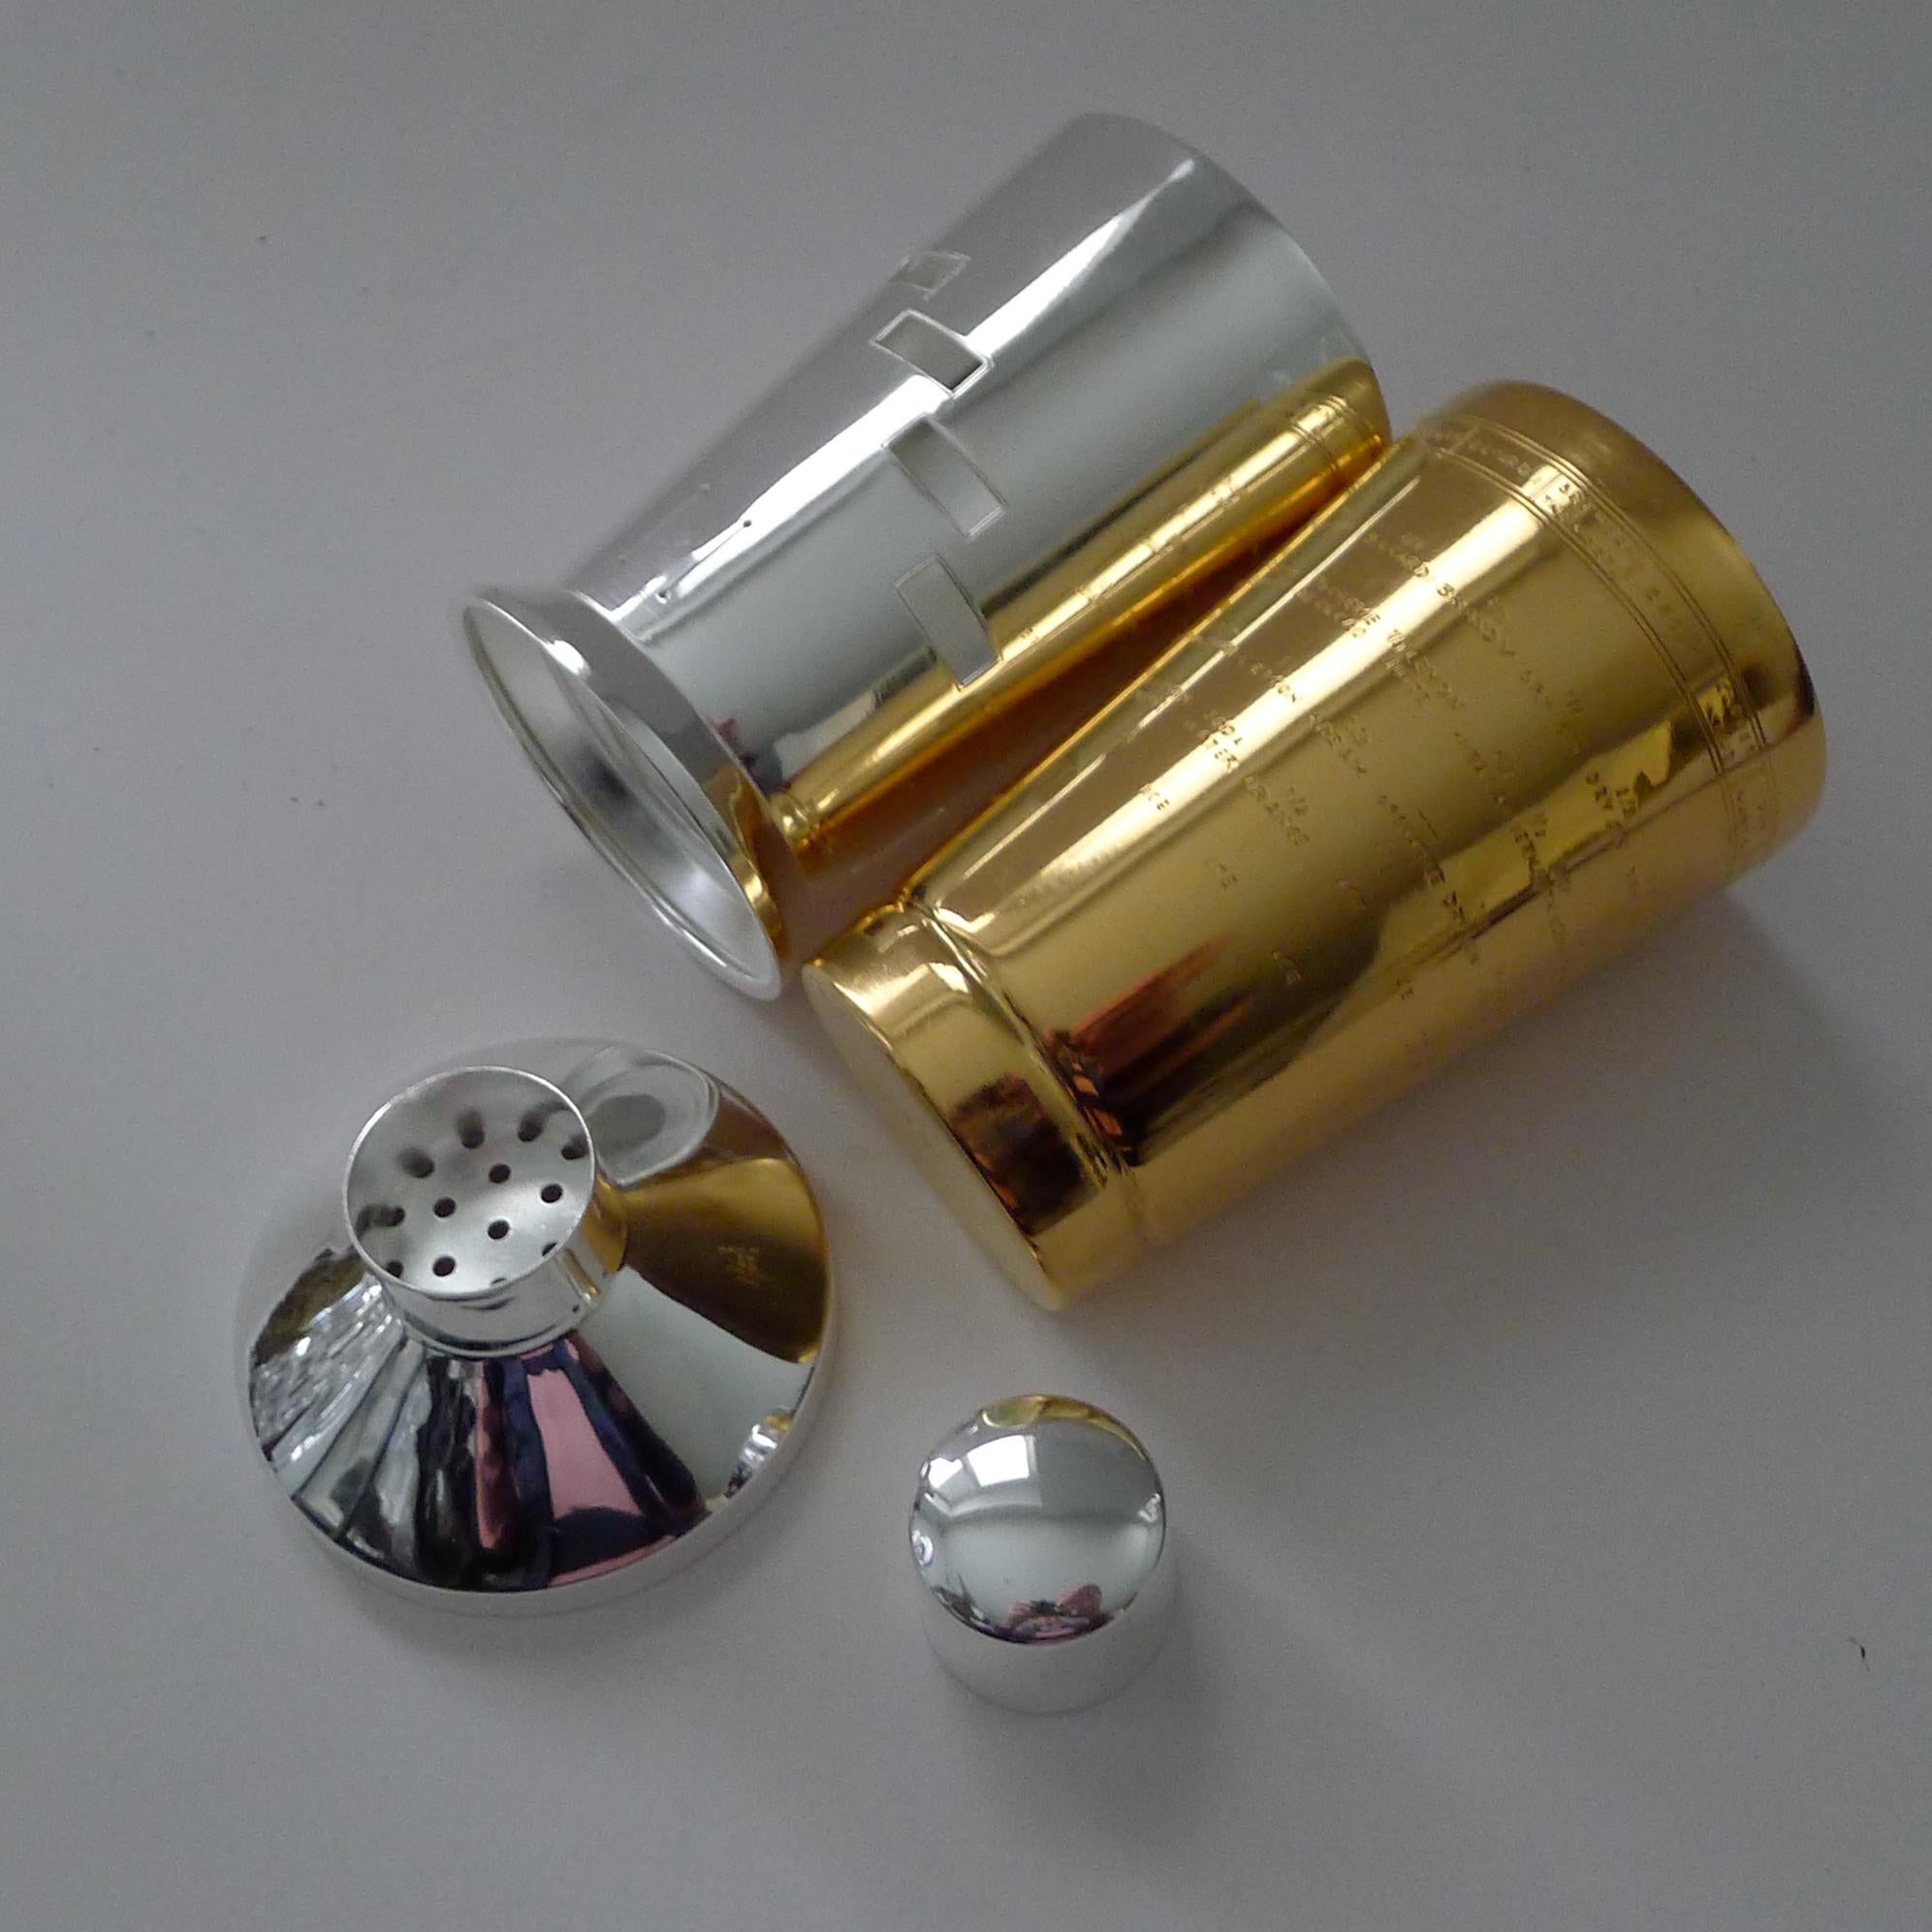 A stunning vintage Art Deco cocktail shaker in silver and gold plate.  This shaker came to us in a very worn condition.  Our silversmiths have done an amazing job in restoring it to it's former glory with silver plate on the outer case and lavishly